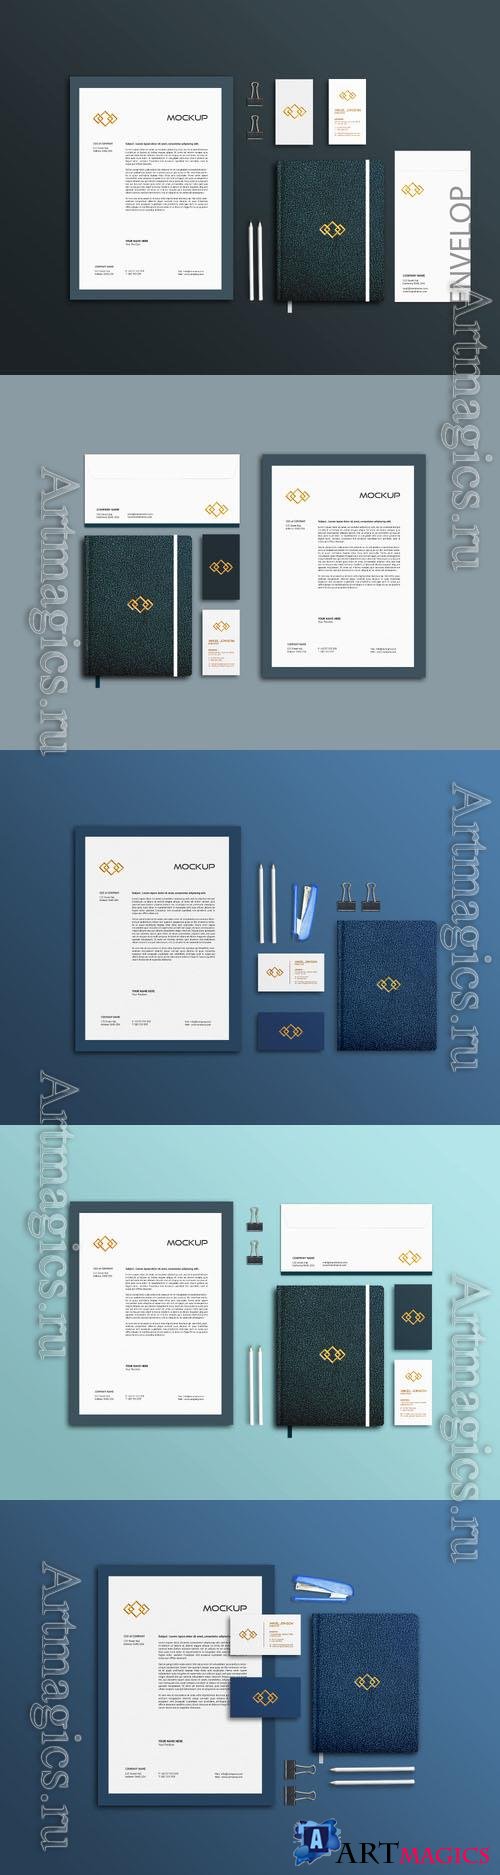 Corporate stationary psd mockup with business card and mockup